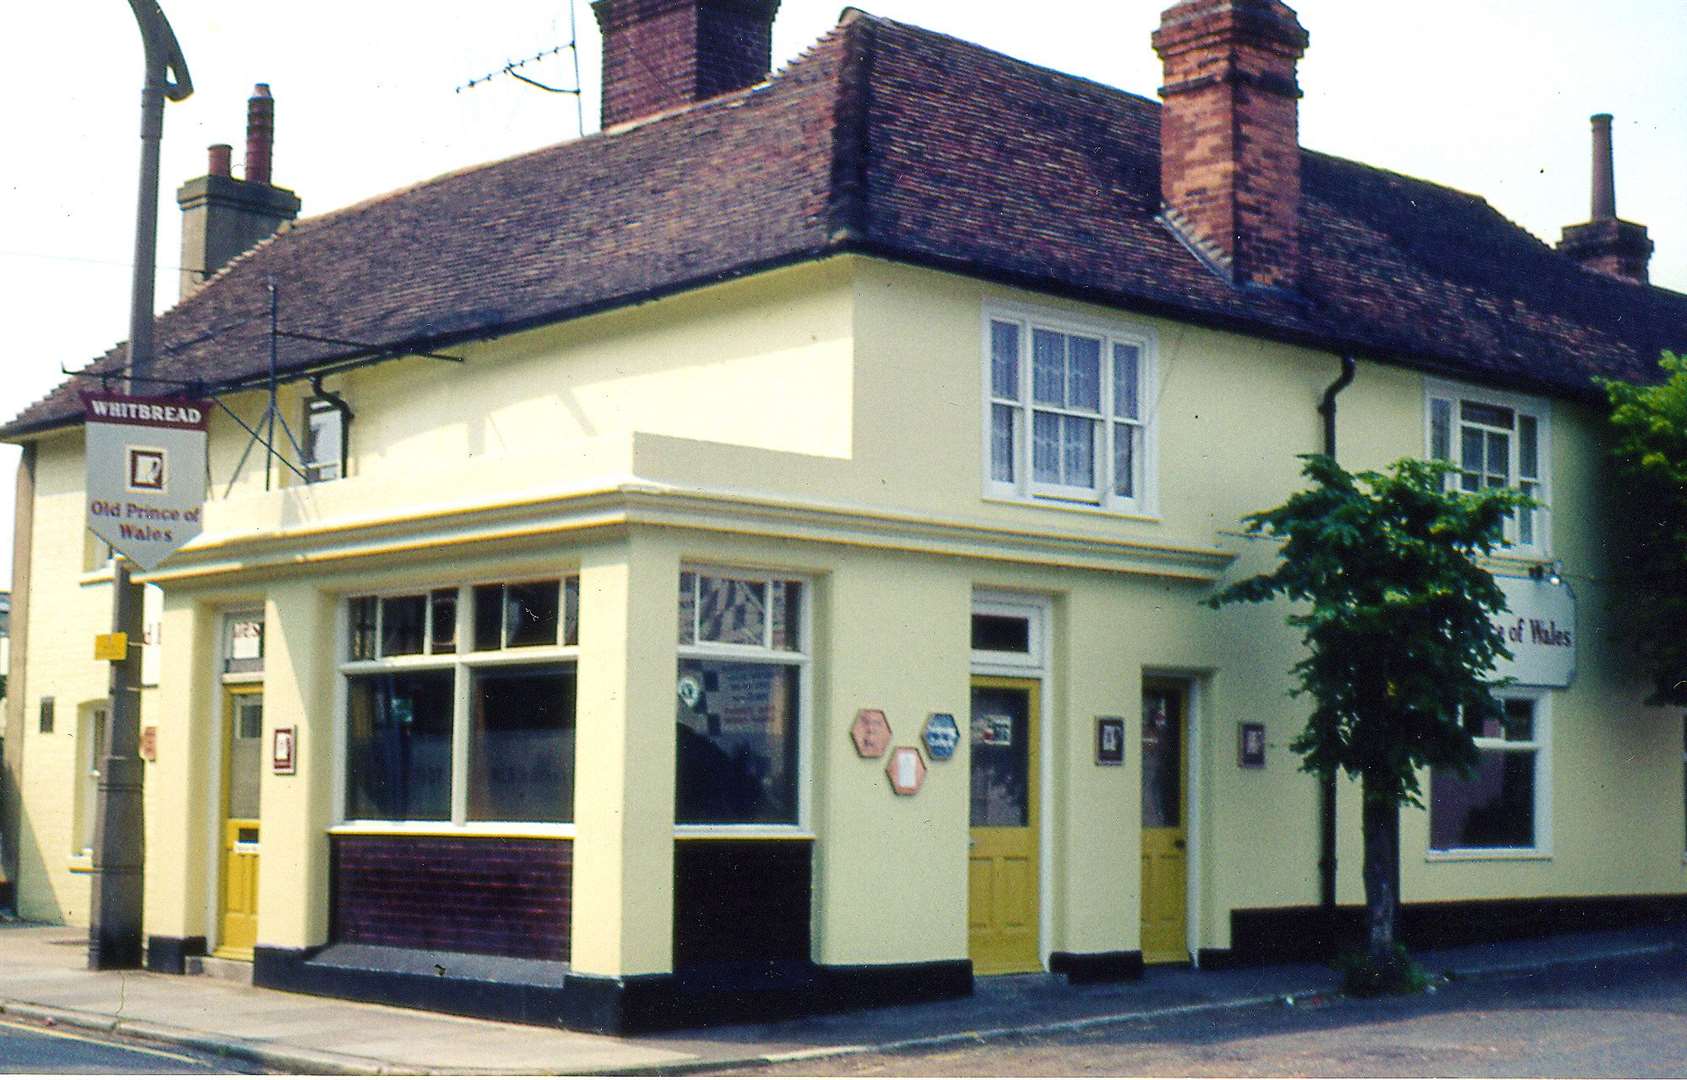 The pub photographed in 1975